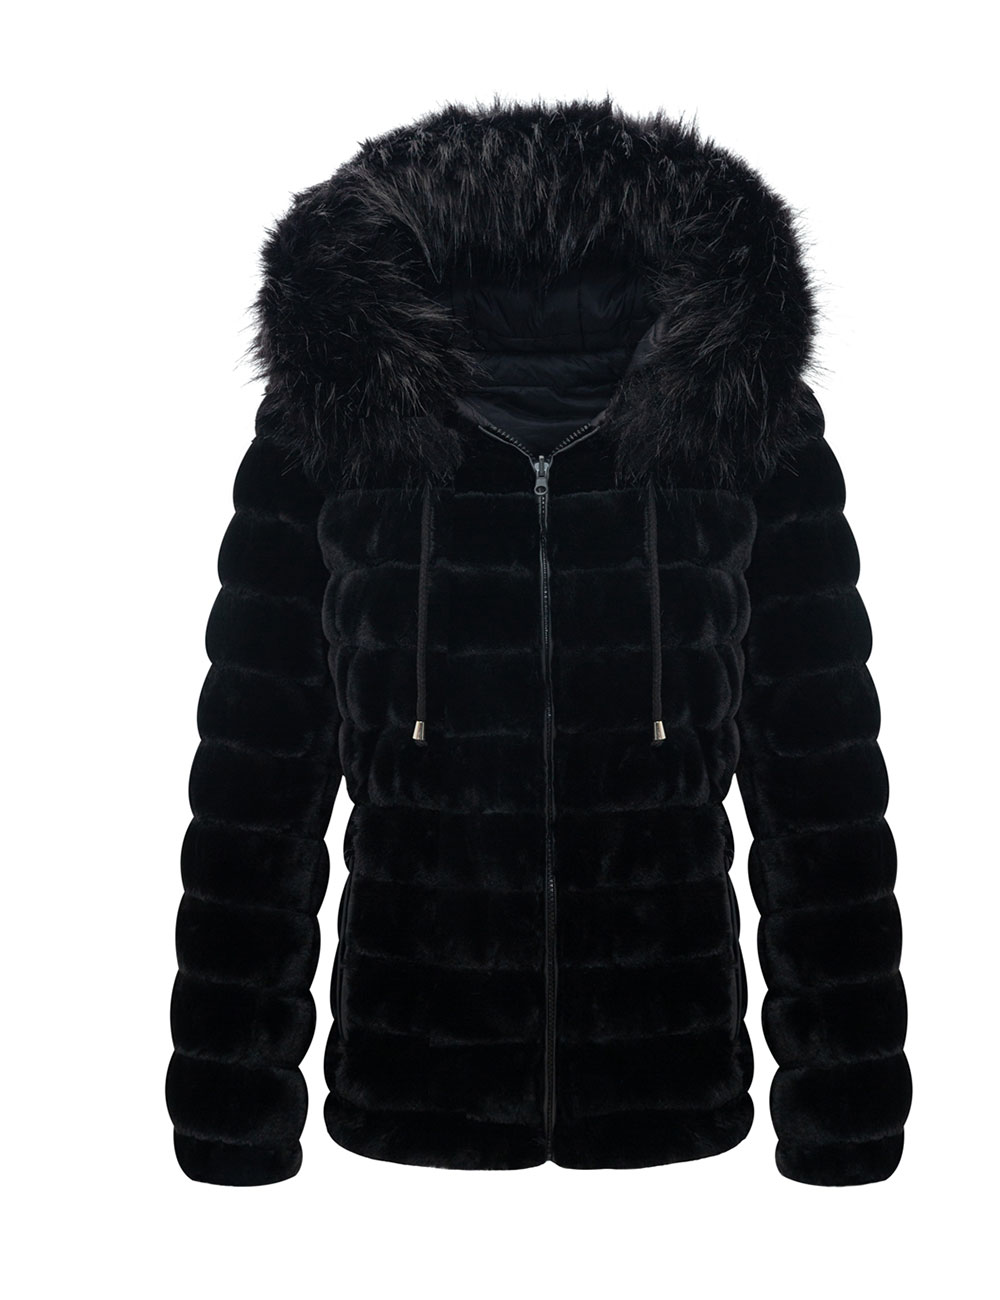 Giolshon Women's Double Sided Puffer Coats Faux Fur Jacket with Fur Collar Fall and Winter - image 1 of 6